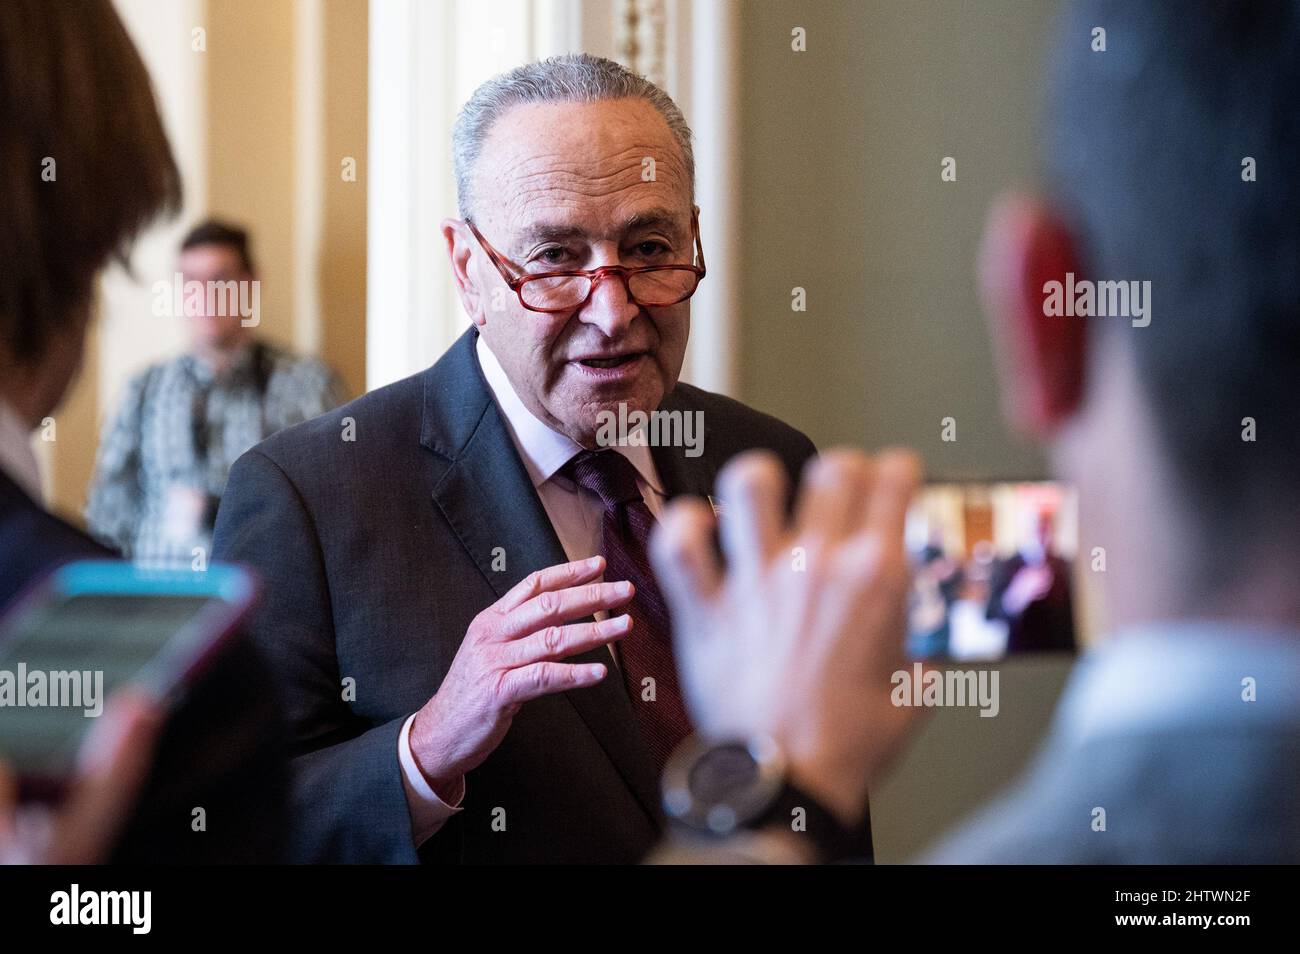 Washington, U.S. 02nd Mar, 2022. March 2, 2022 - Washington, DC, United States: Senate Majority Leader Chuck Schumer (D-NY) speaking with the press about his meeting with Supreme Court nominee Judge Ketanji Brown Jackson. (Photo by Michael Brochstein/Sipa USA) Credit: Sipa USA/Alamy Live News Stock Photo